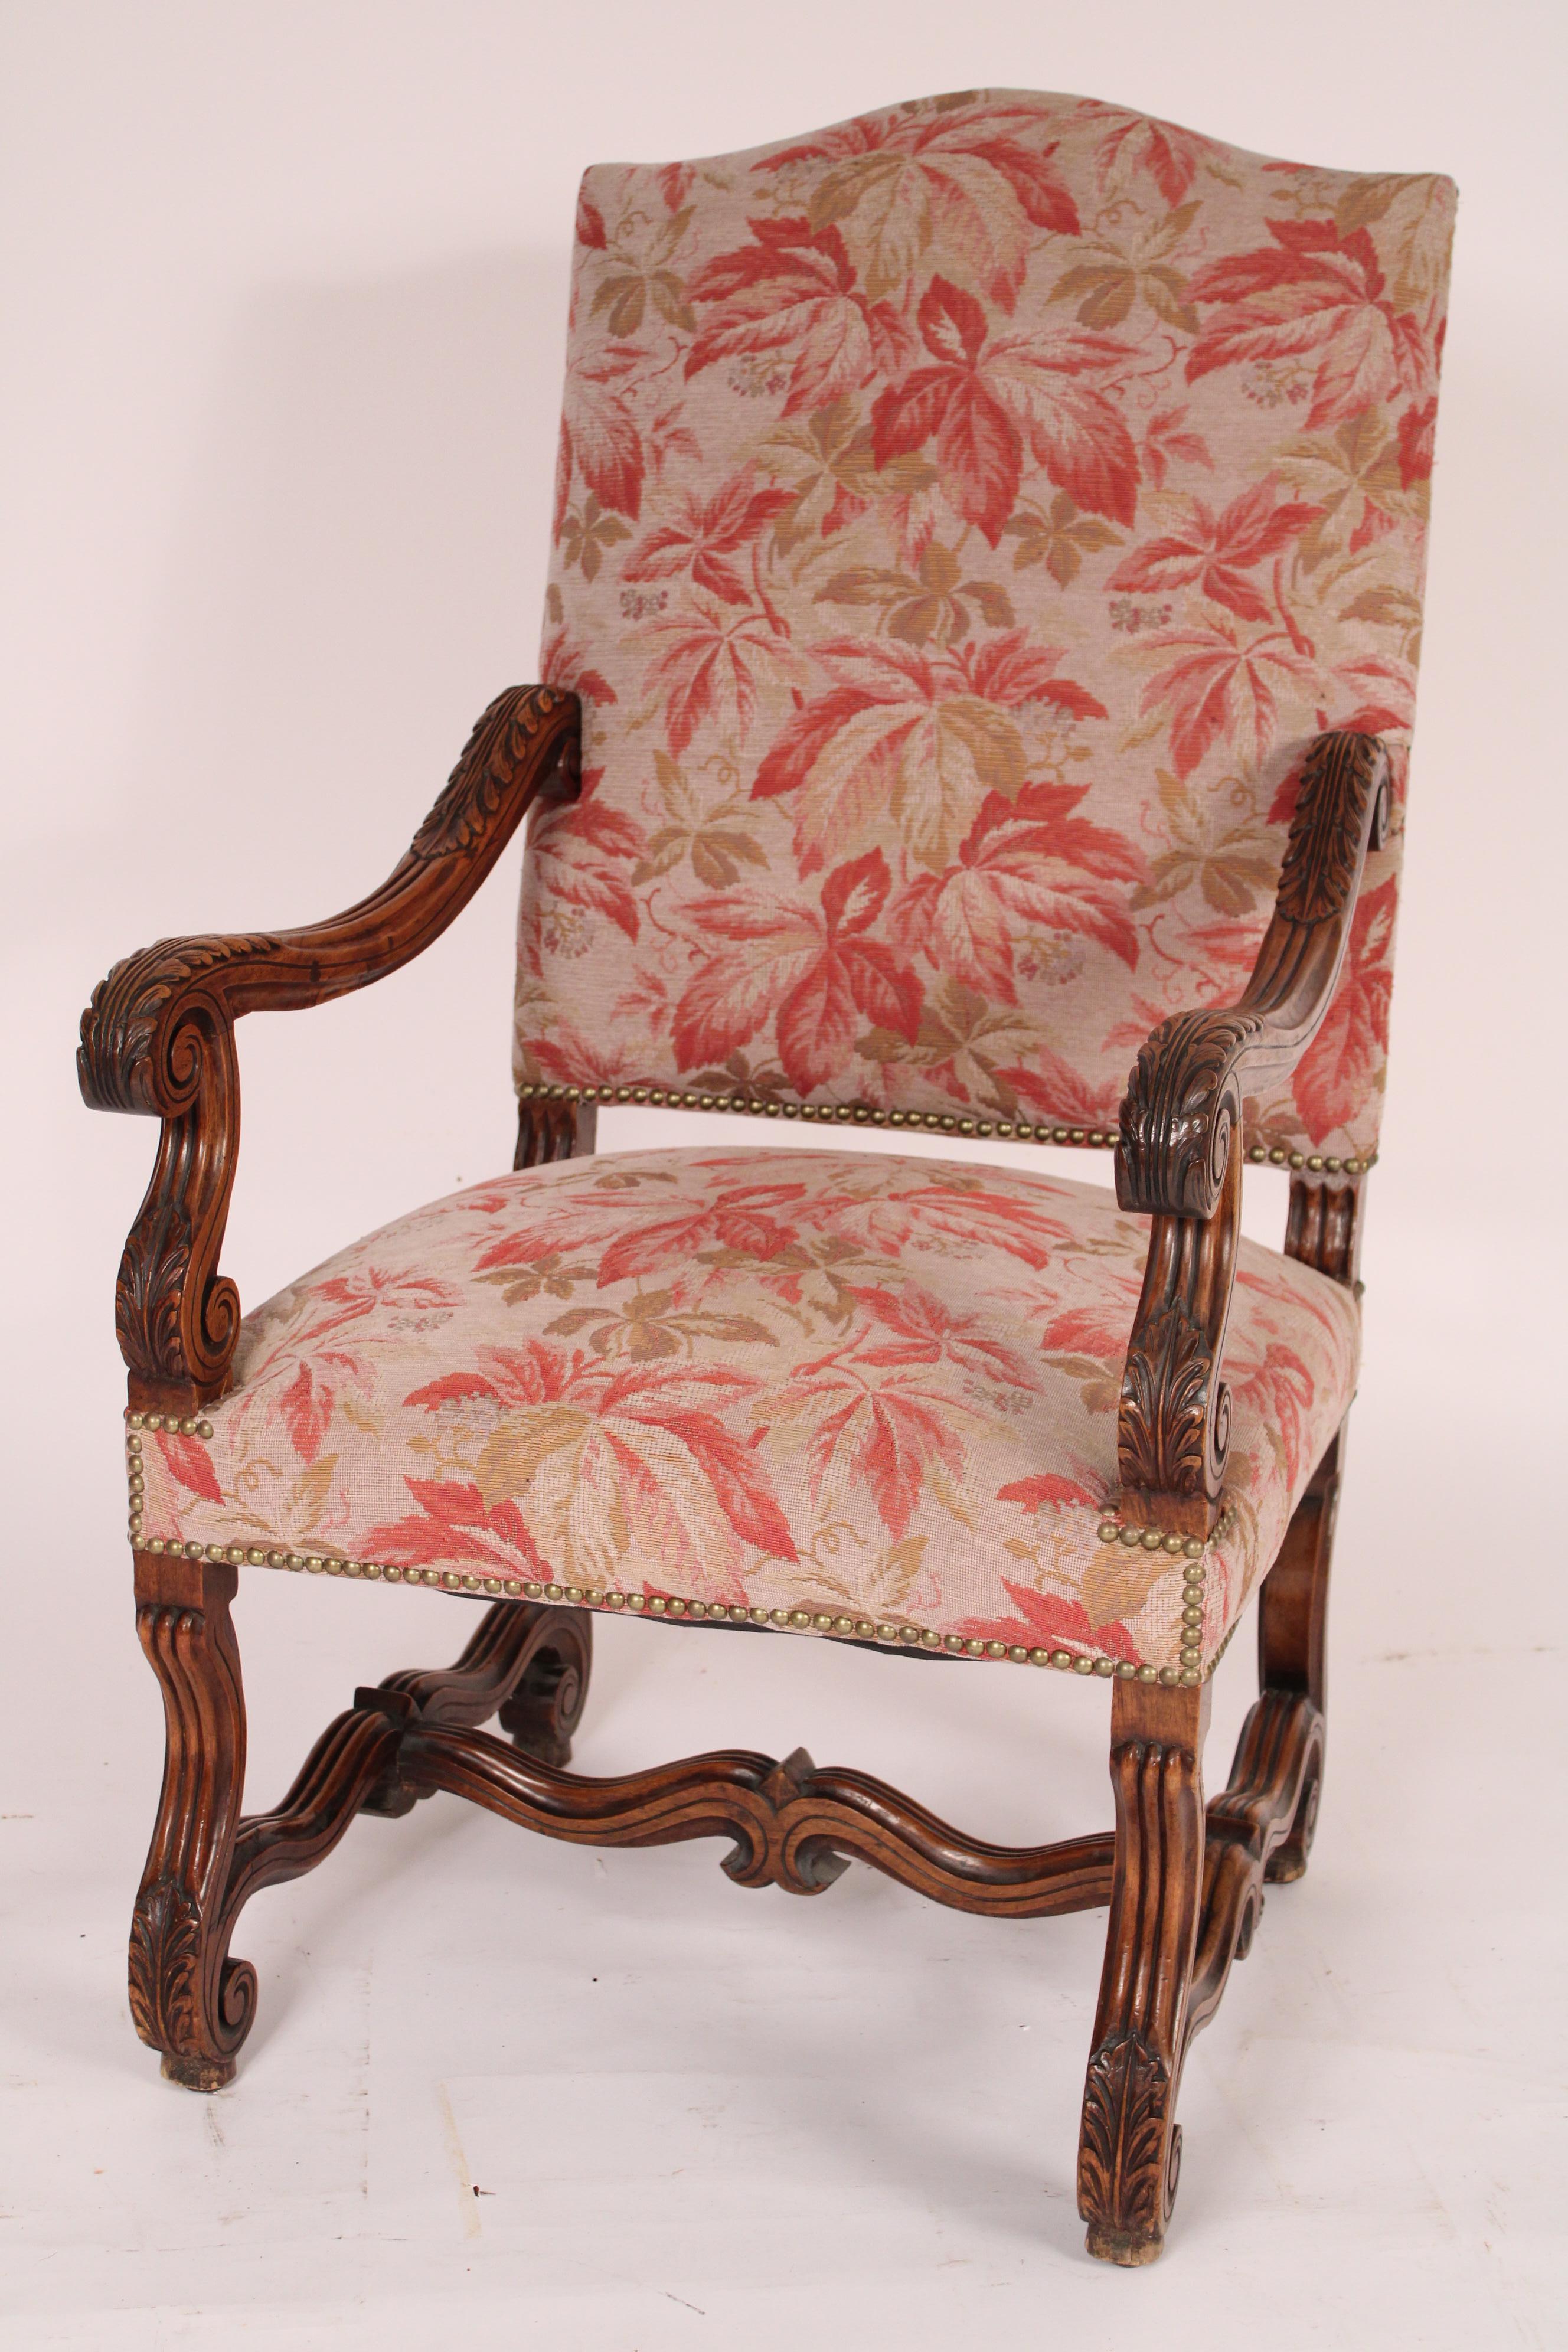 Pair of Louis XIV style carved walnut armchairs, circa 1910. With a cupids bow crest rail, serpentine acanthus carved arms, S shaped acanthus carved arm supports, legs and stretcher bars. The walnut has a nice old patina. Both chairs recently